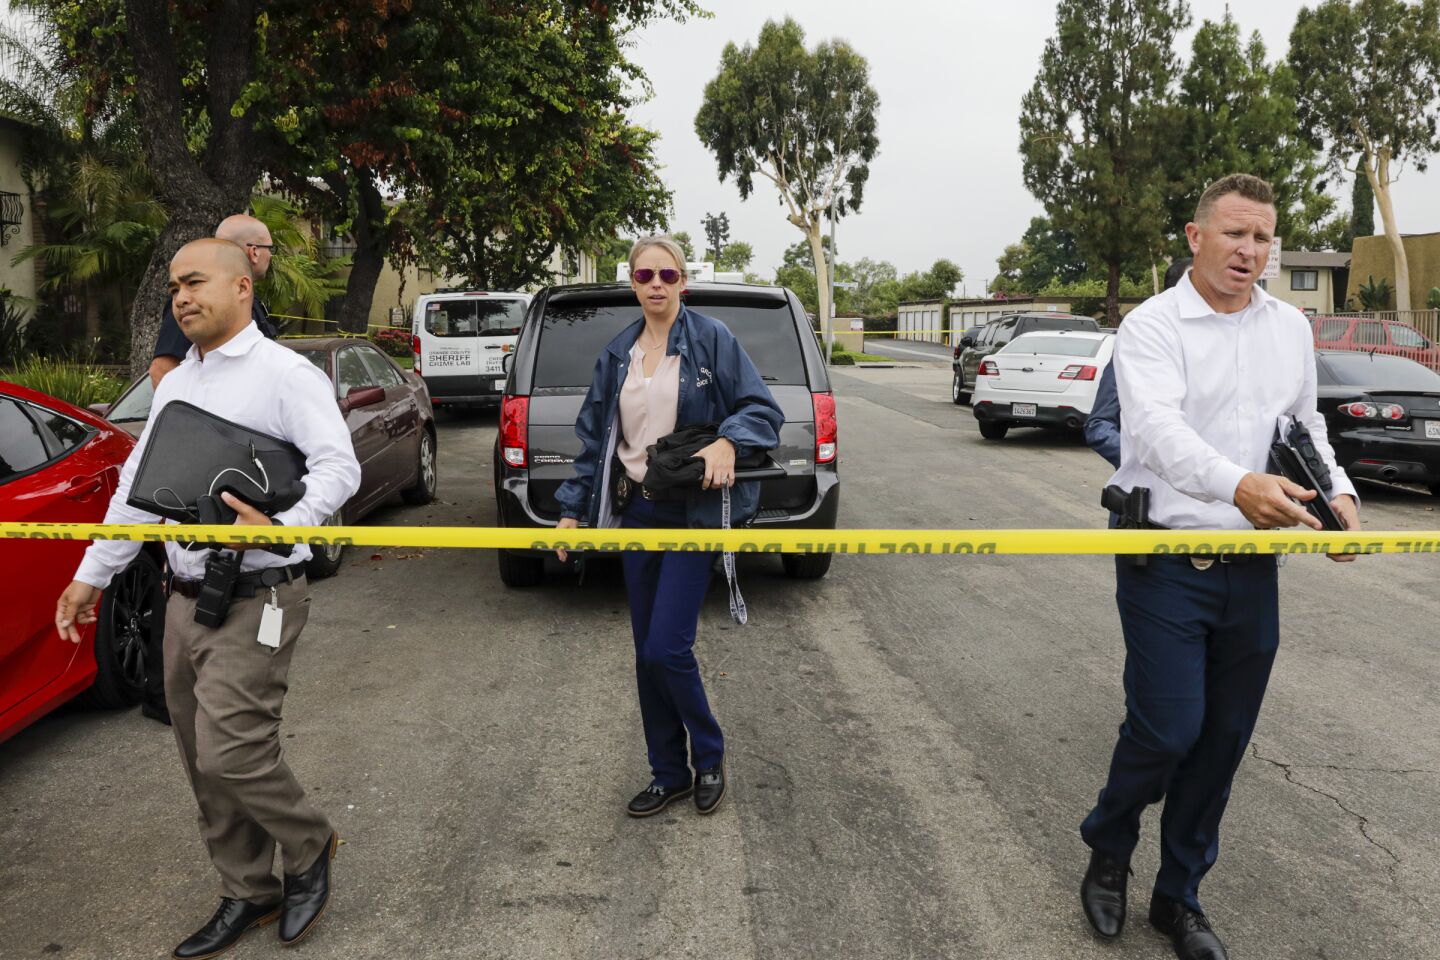 Police investigators work at the Casa De Portola apartment complex in Garden Grove where the first two victims in a stabbing rampage were attacked Wednesday.